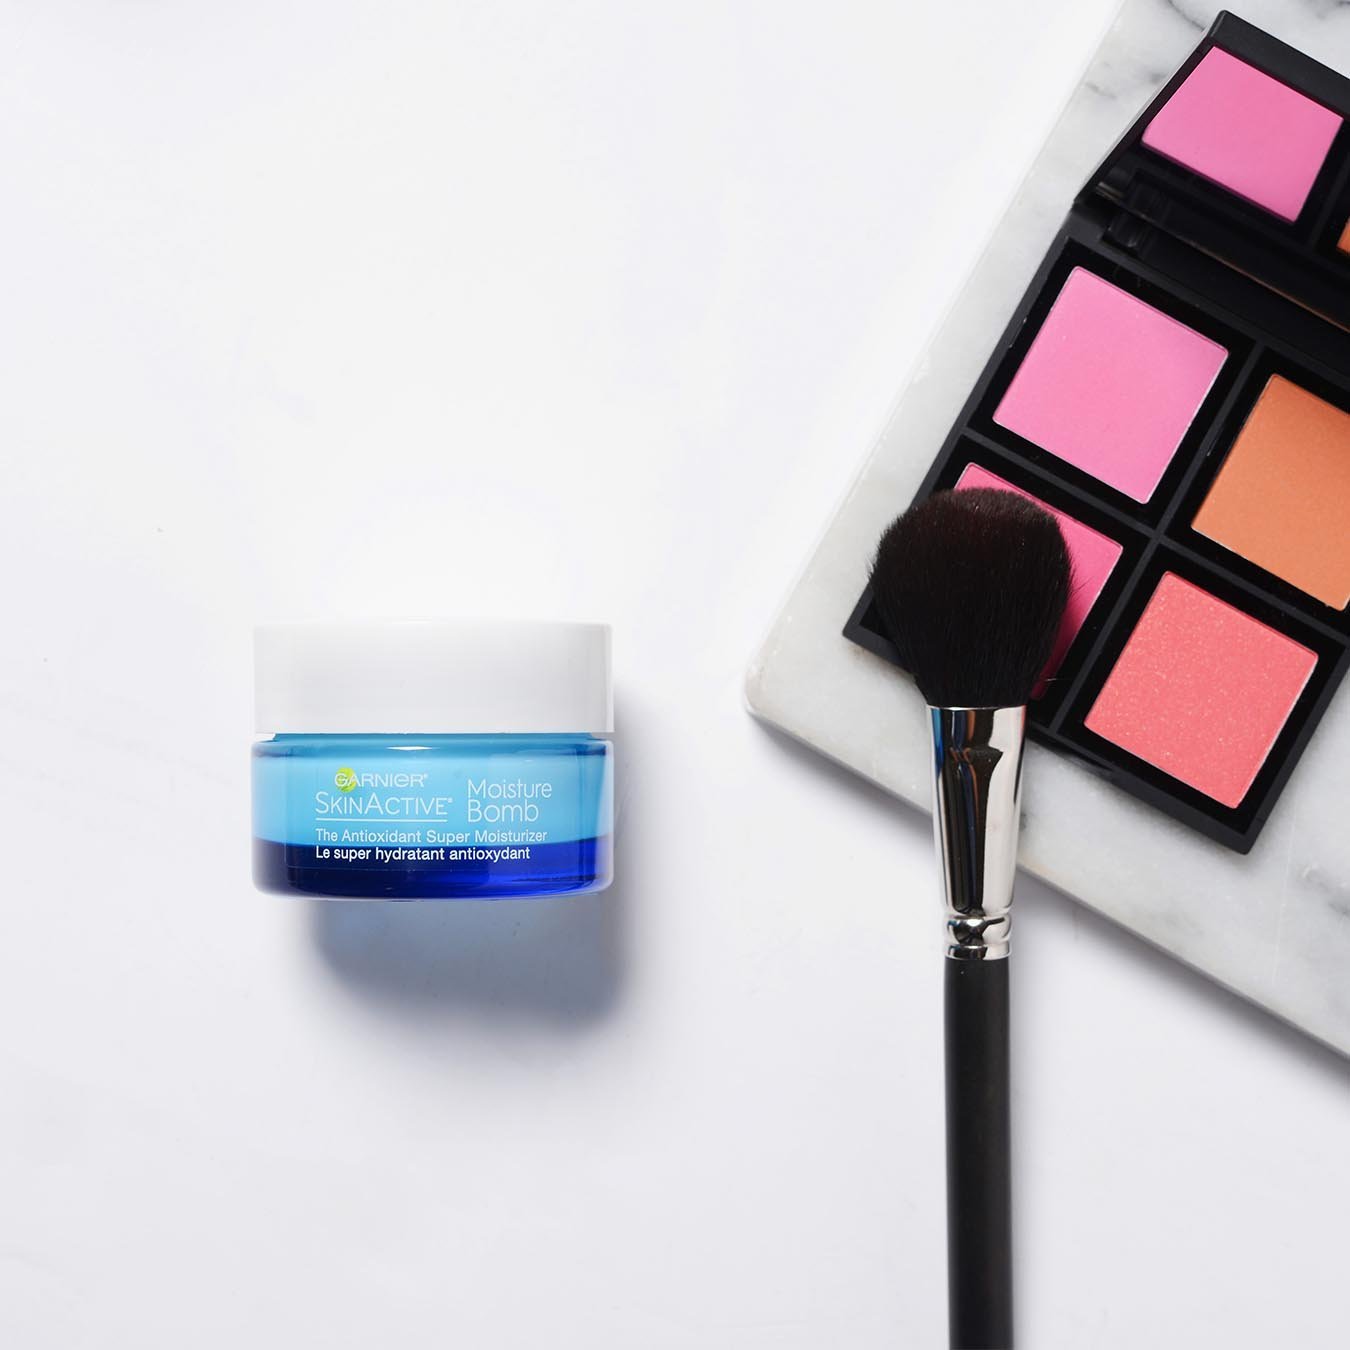 Garnier SkinActive Moisture Bomb The Super Antioxidant Super Moisturizer on a white background next to a palette of pink and orange blushes on a marble slab with a makeup brush.